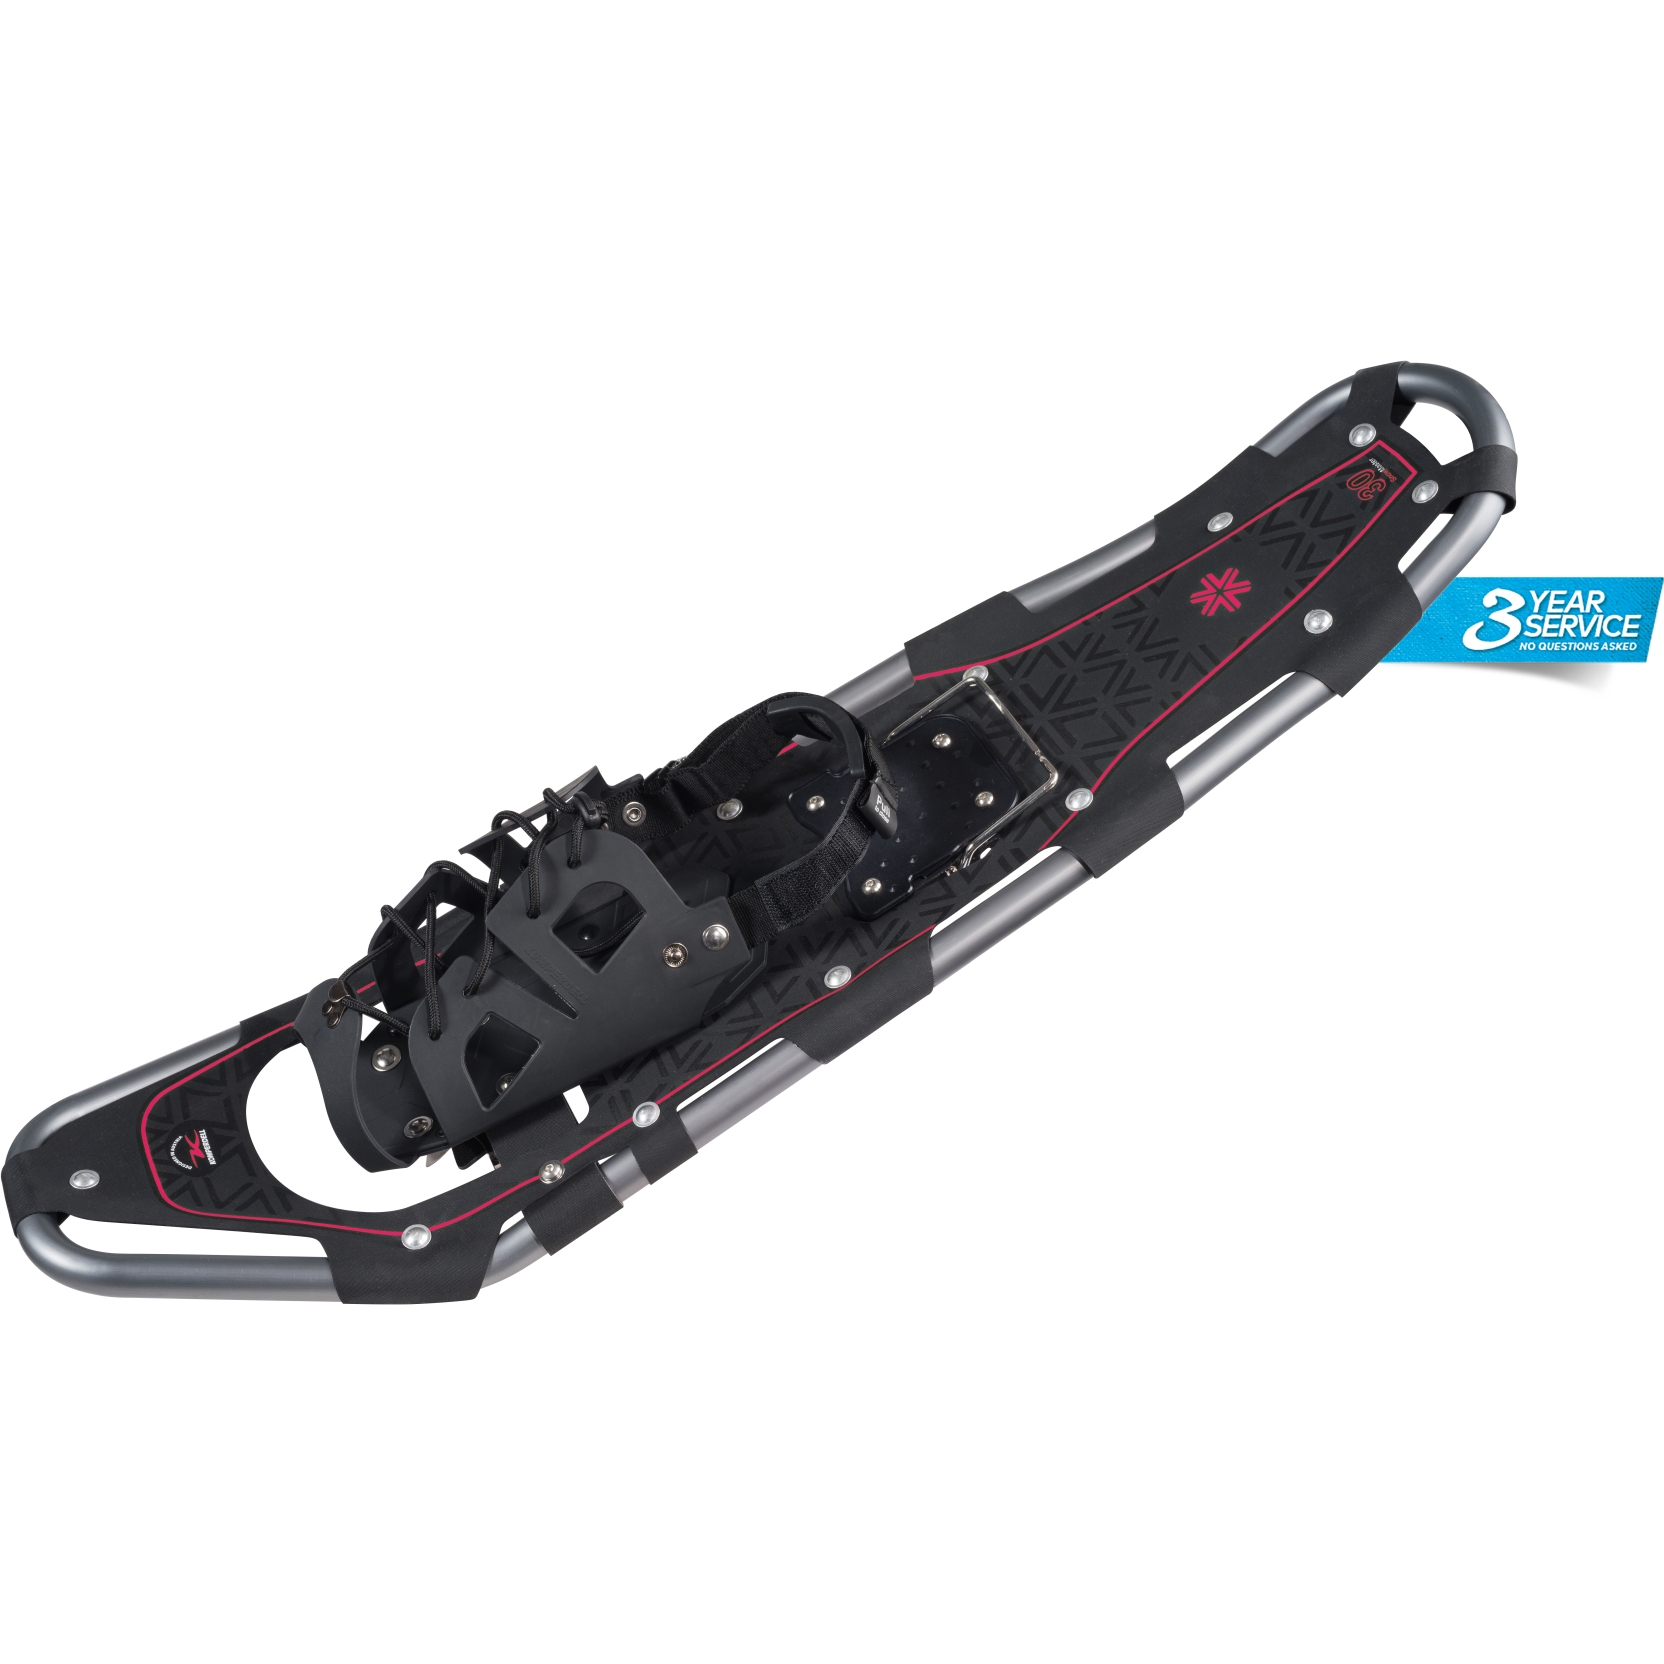 Picture of Komperdell Peakmaster Snowshoe T30 Snowshoes - black/red